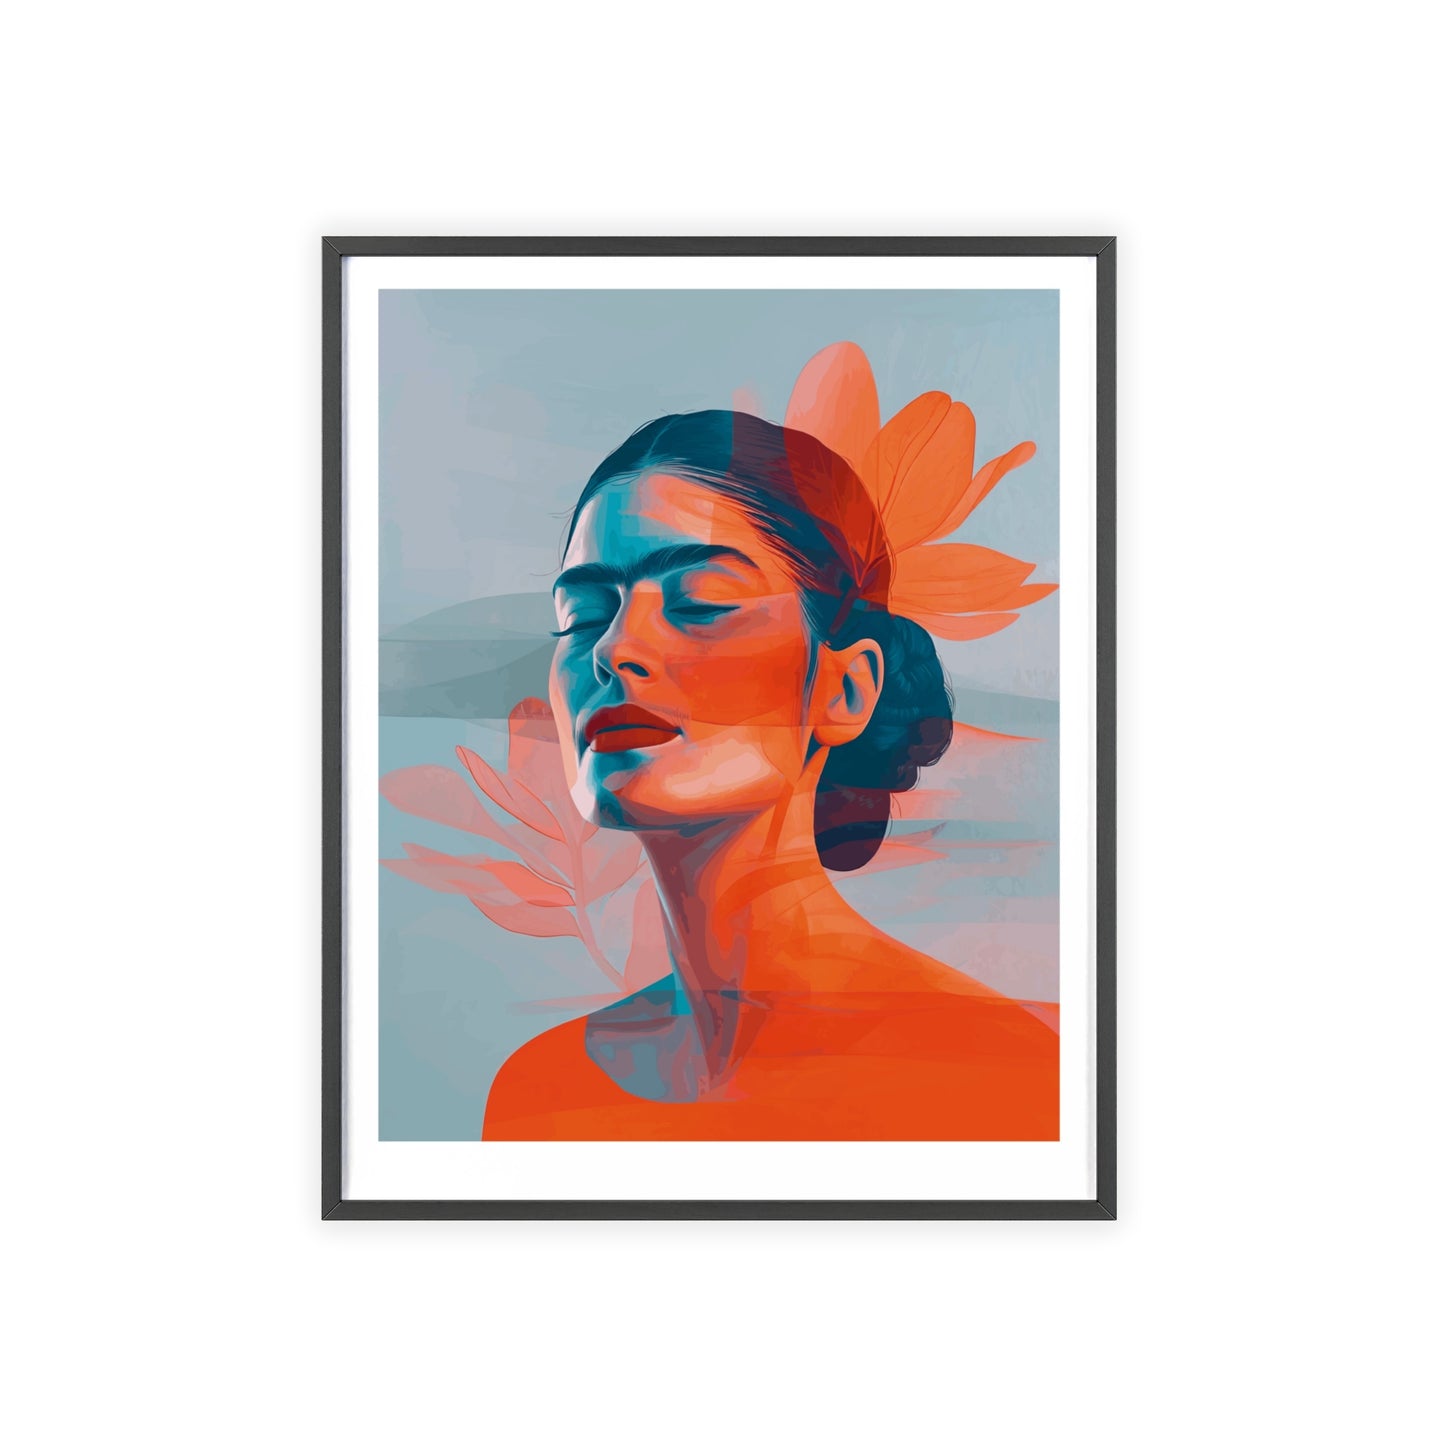 Framed poster featuring a high-resolution, minimalist portrait of Frida Kahlo with closed eyes. The portrait uses a double exposure effect with a background of orange and blue gradient leaves. The artwork is in a flat design style with smooth lines and geometric shapes.